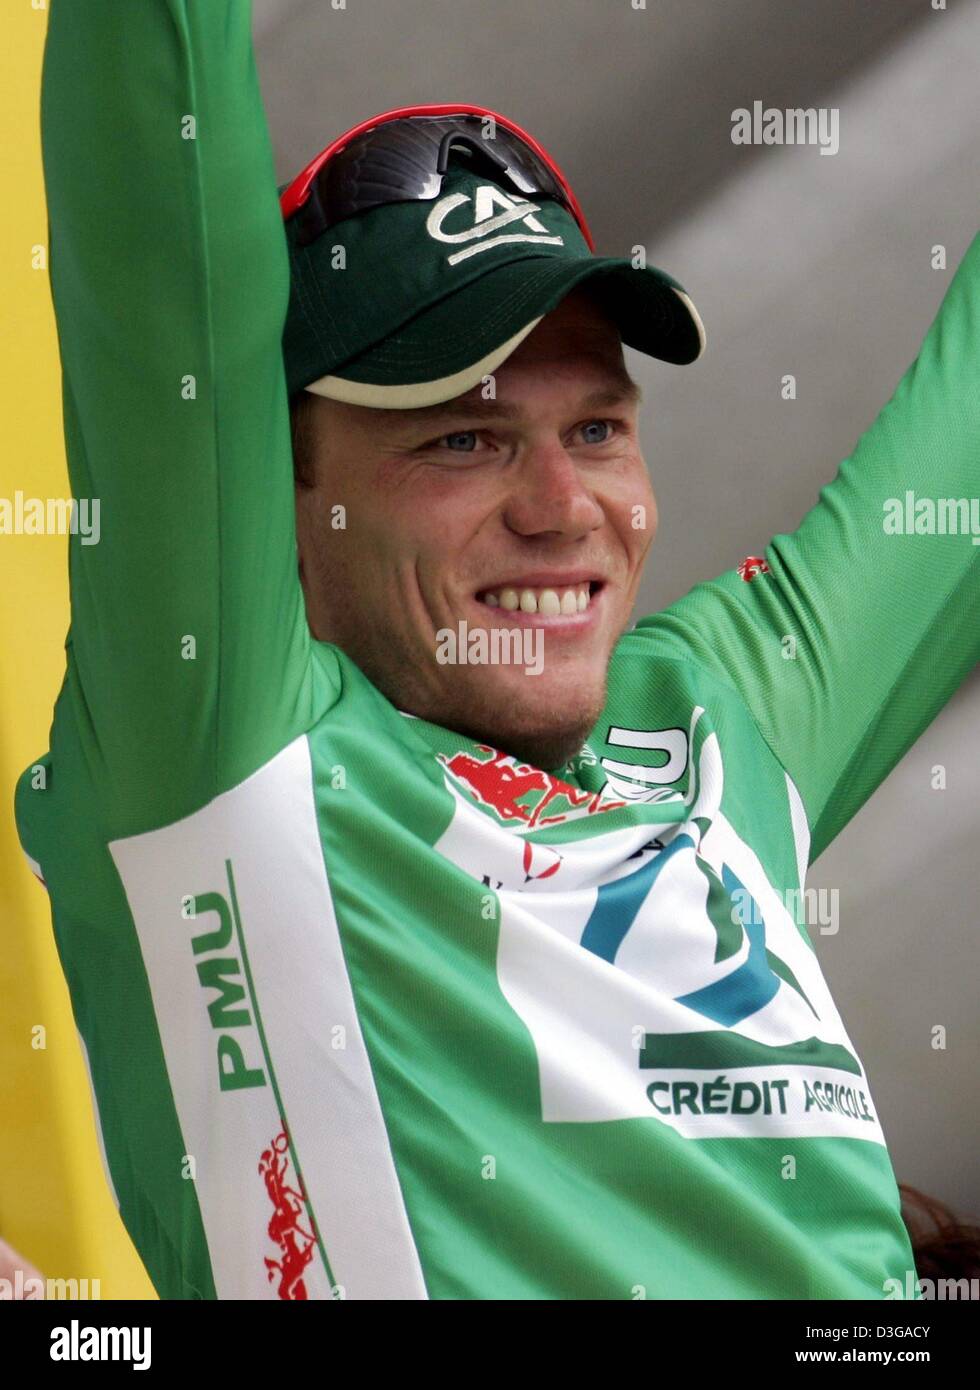 (dpa) - Norwegian Thor Hushovd of team Credit Agricole waves from the podium after putting on the best sprinter's green jersey after the first stage of the Tour de France in Charleroi, Belgium, 4 July 2004. The first and 202.5km long stage of the 91st Tour de France cycling race took the cyclists from Liege to Charleroi. Stock Photo